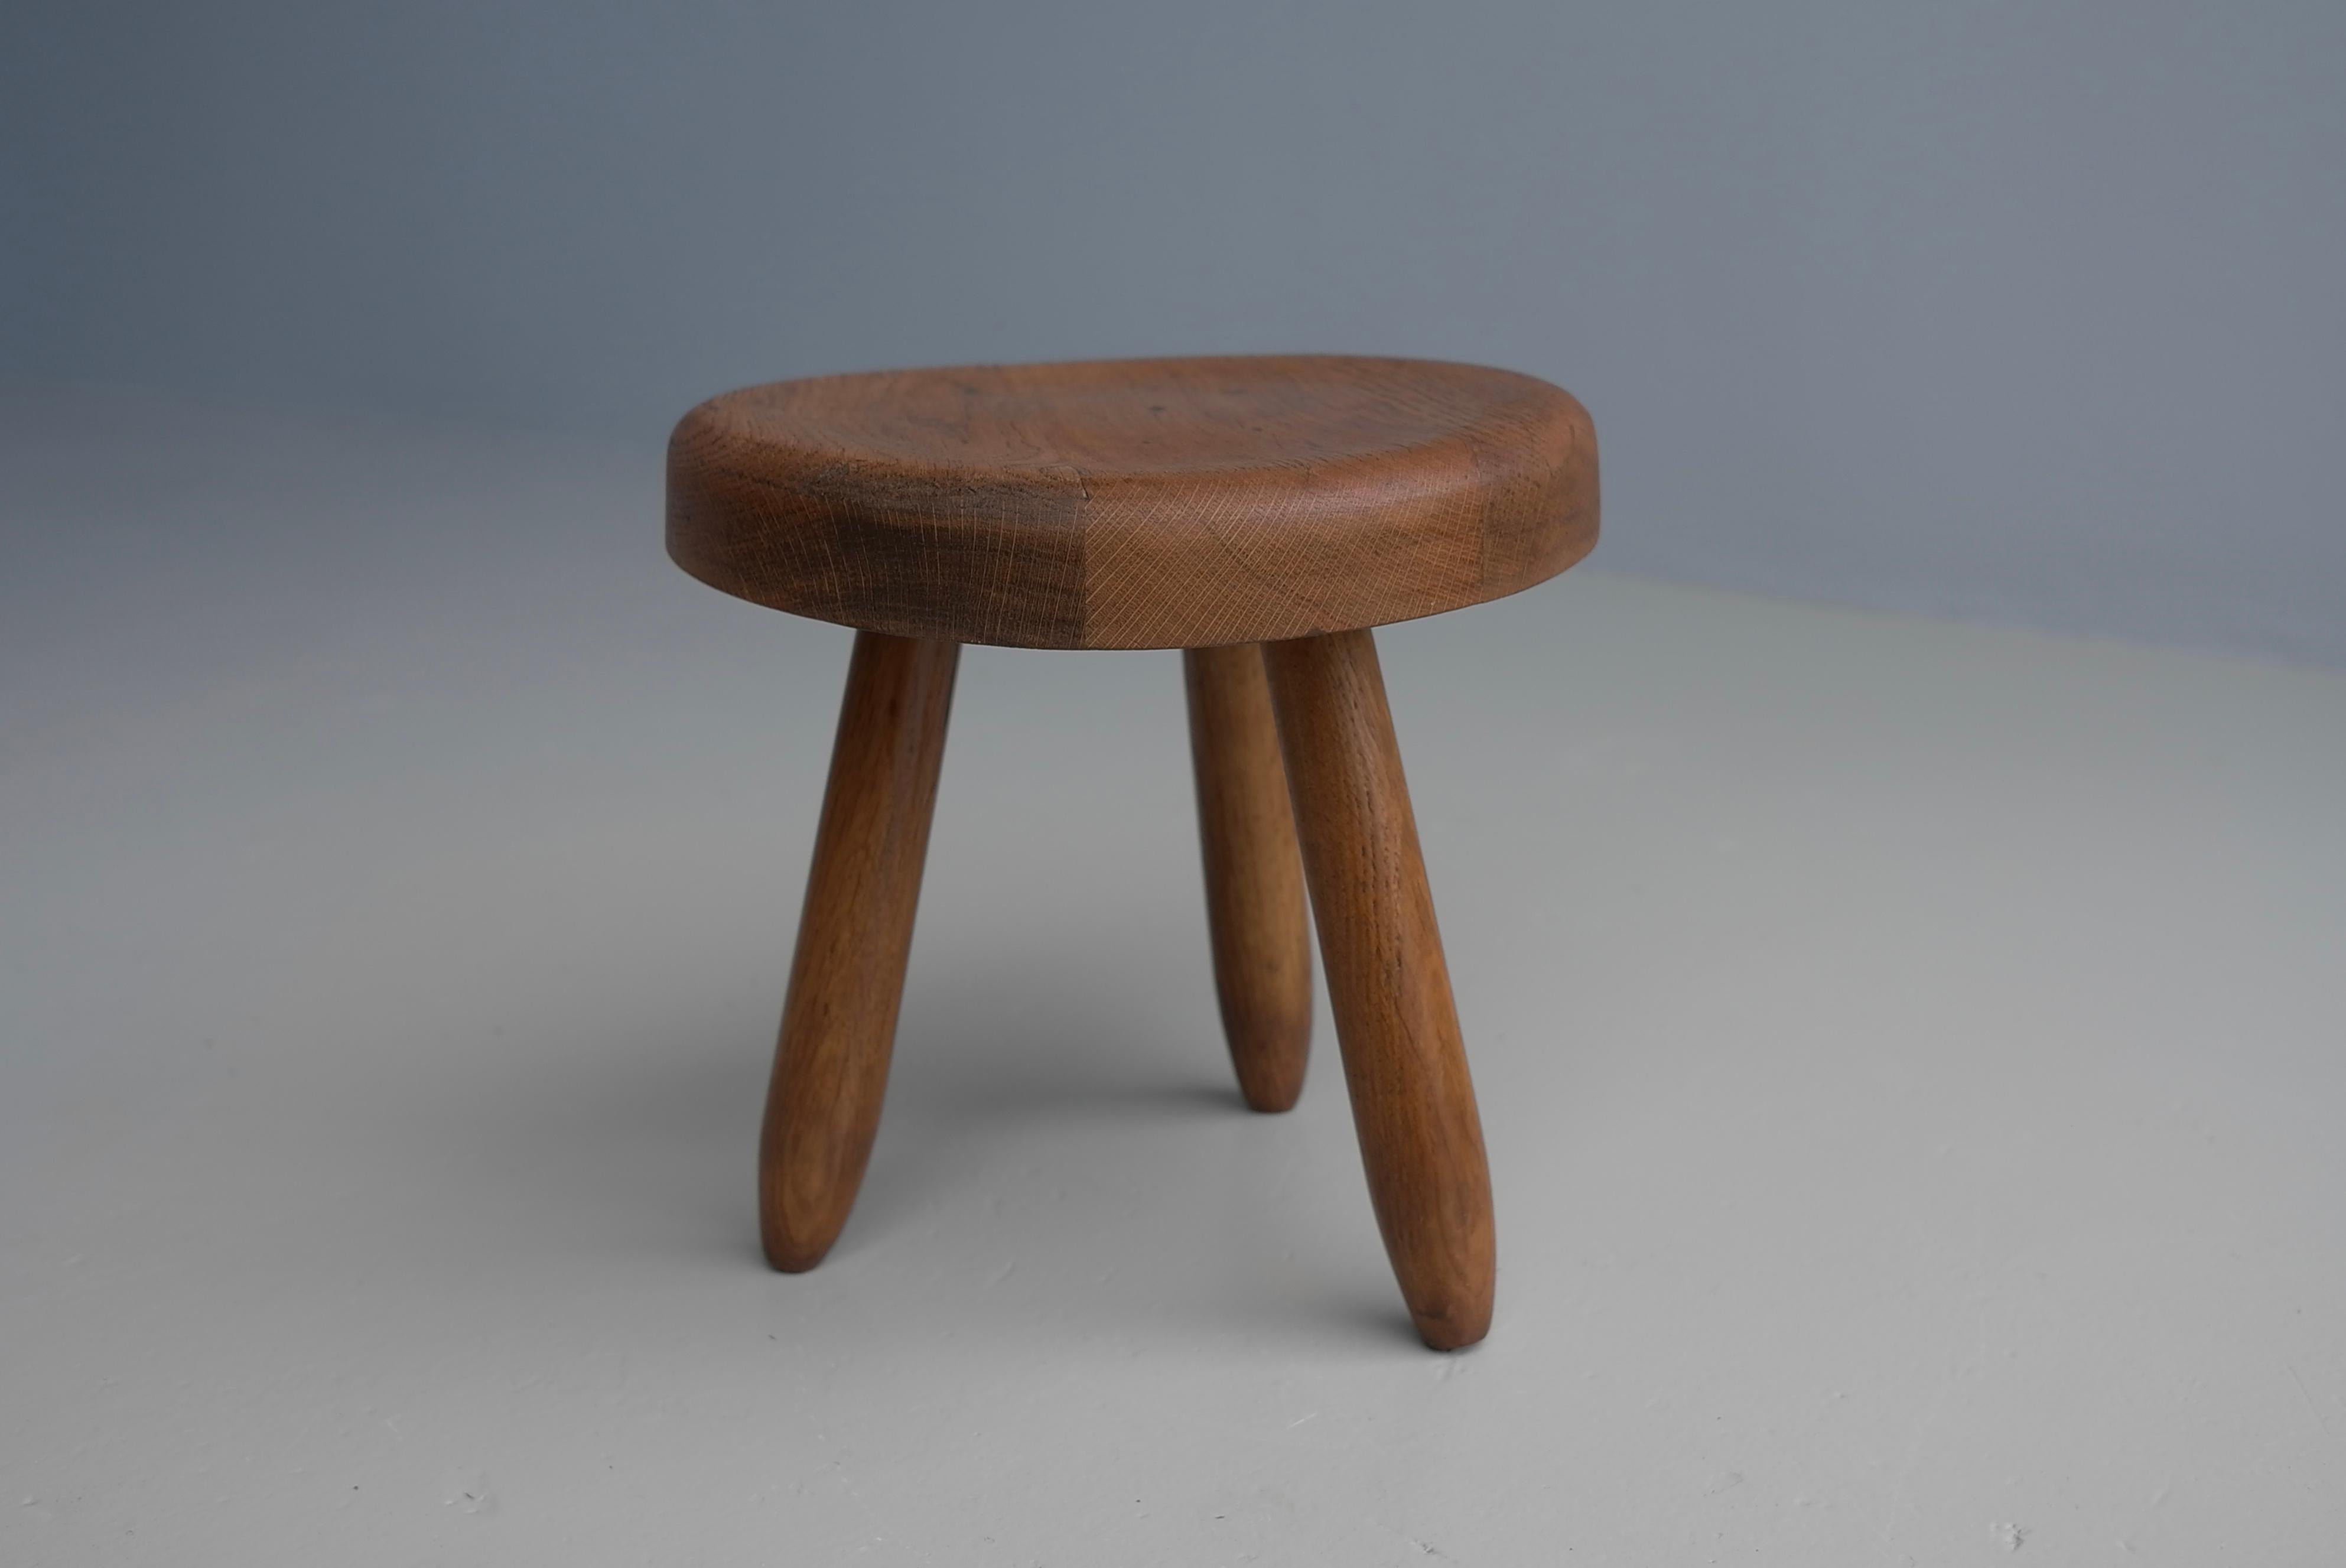 Solid Oak ' Berger' Stool in Style of Charlotte Perriand, France, 1950's For Sale 4